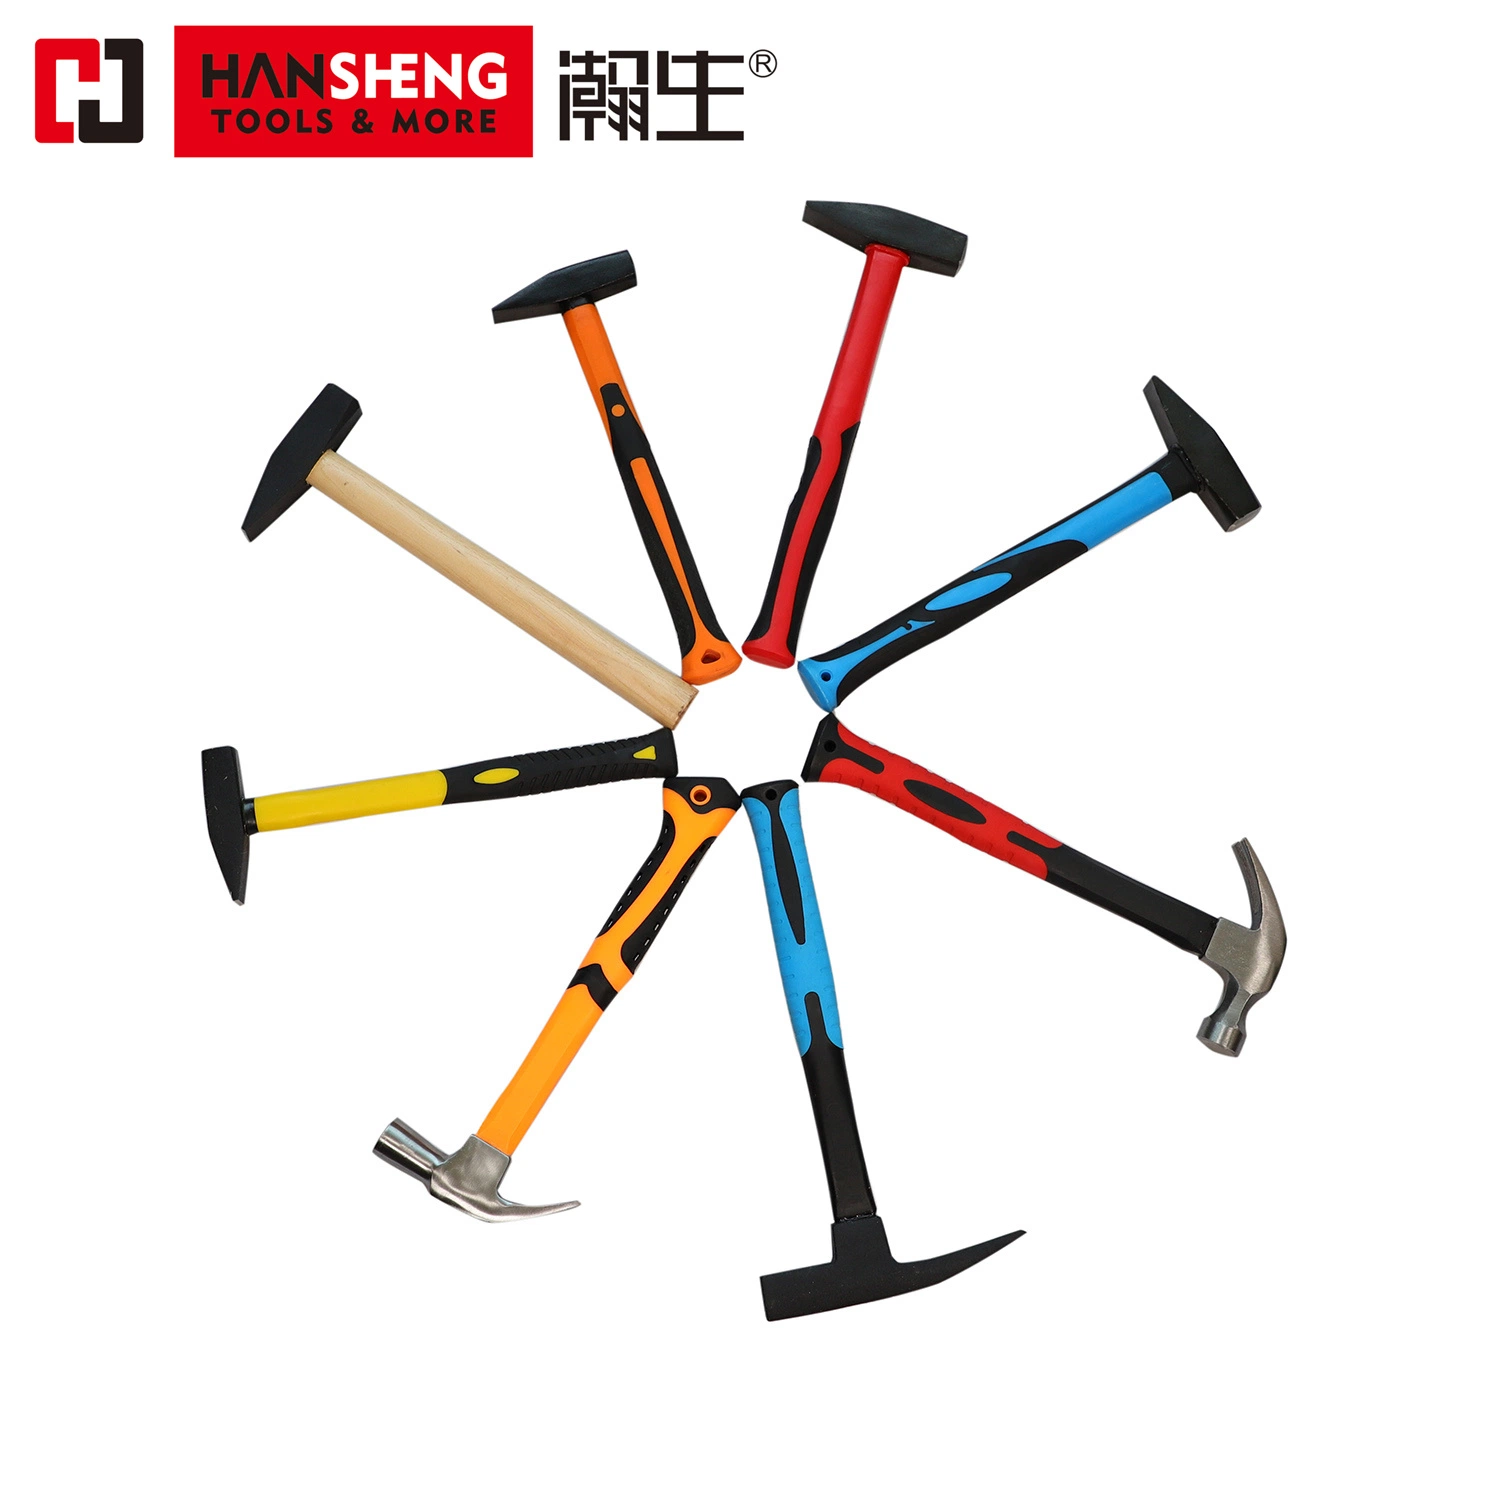 Professional Hand Tool, Hardware Tools, Made of CRV or High Carbon Steel, Rubber Hammer